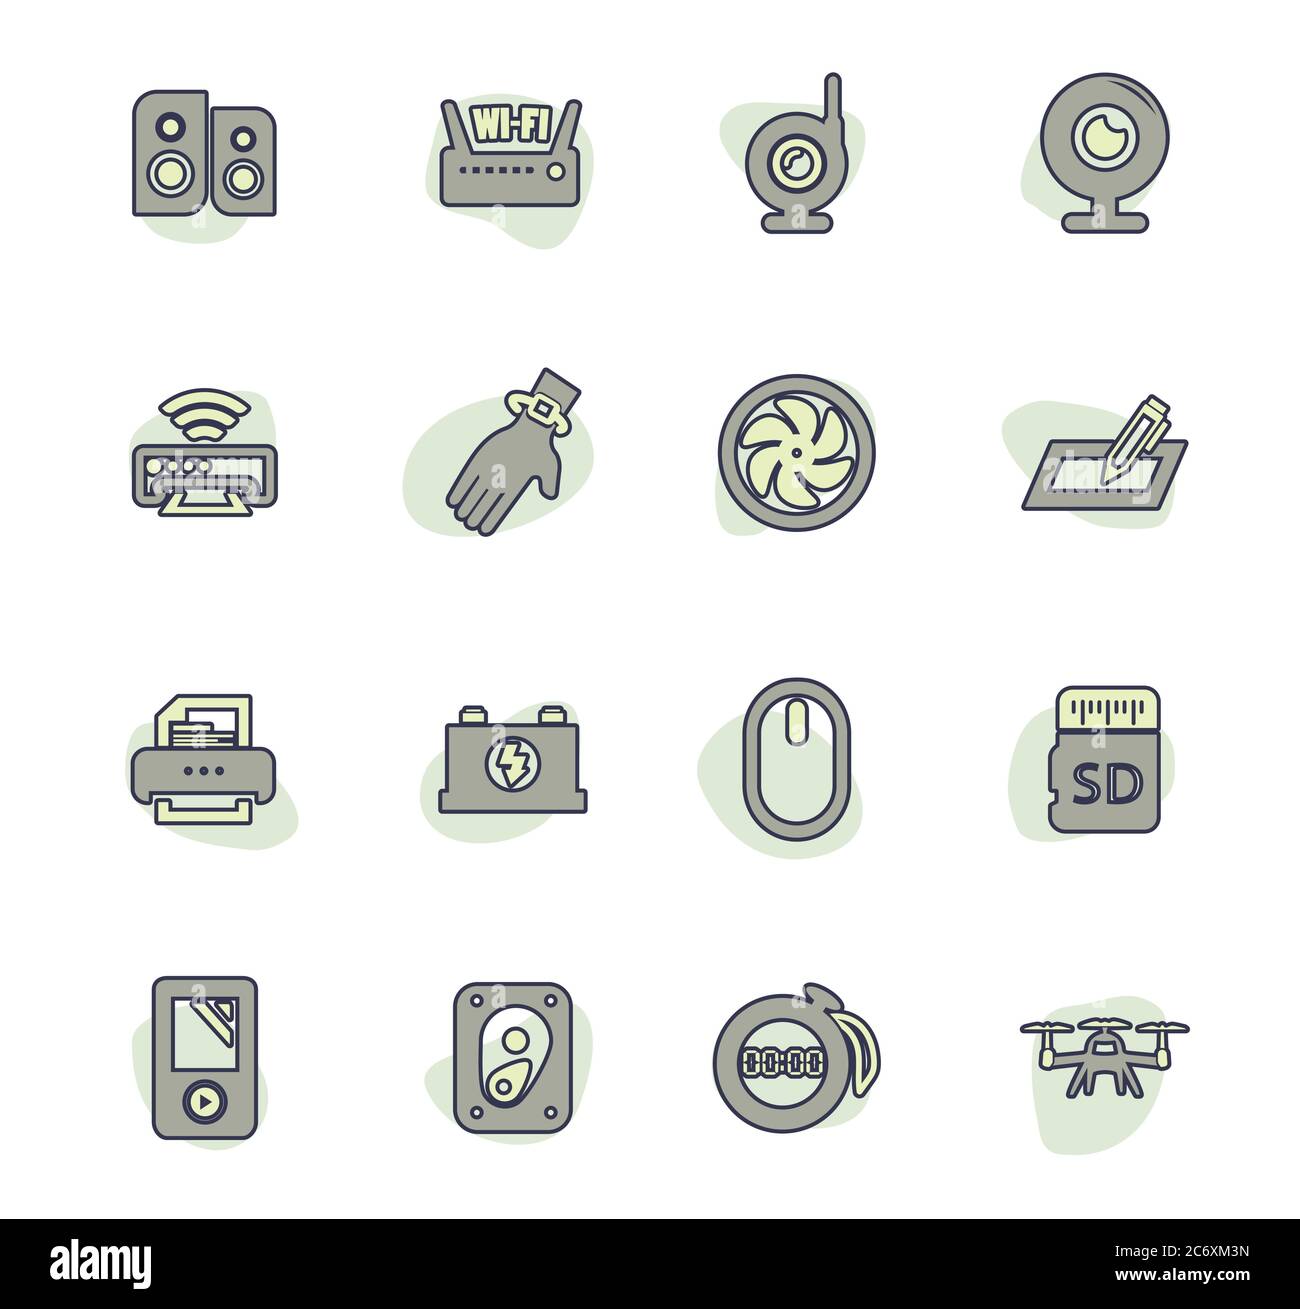 Devices icons set Stock Vector